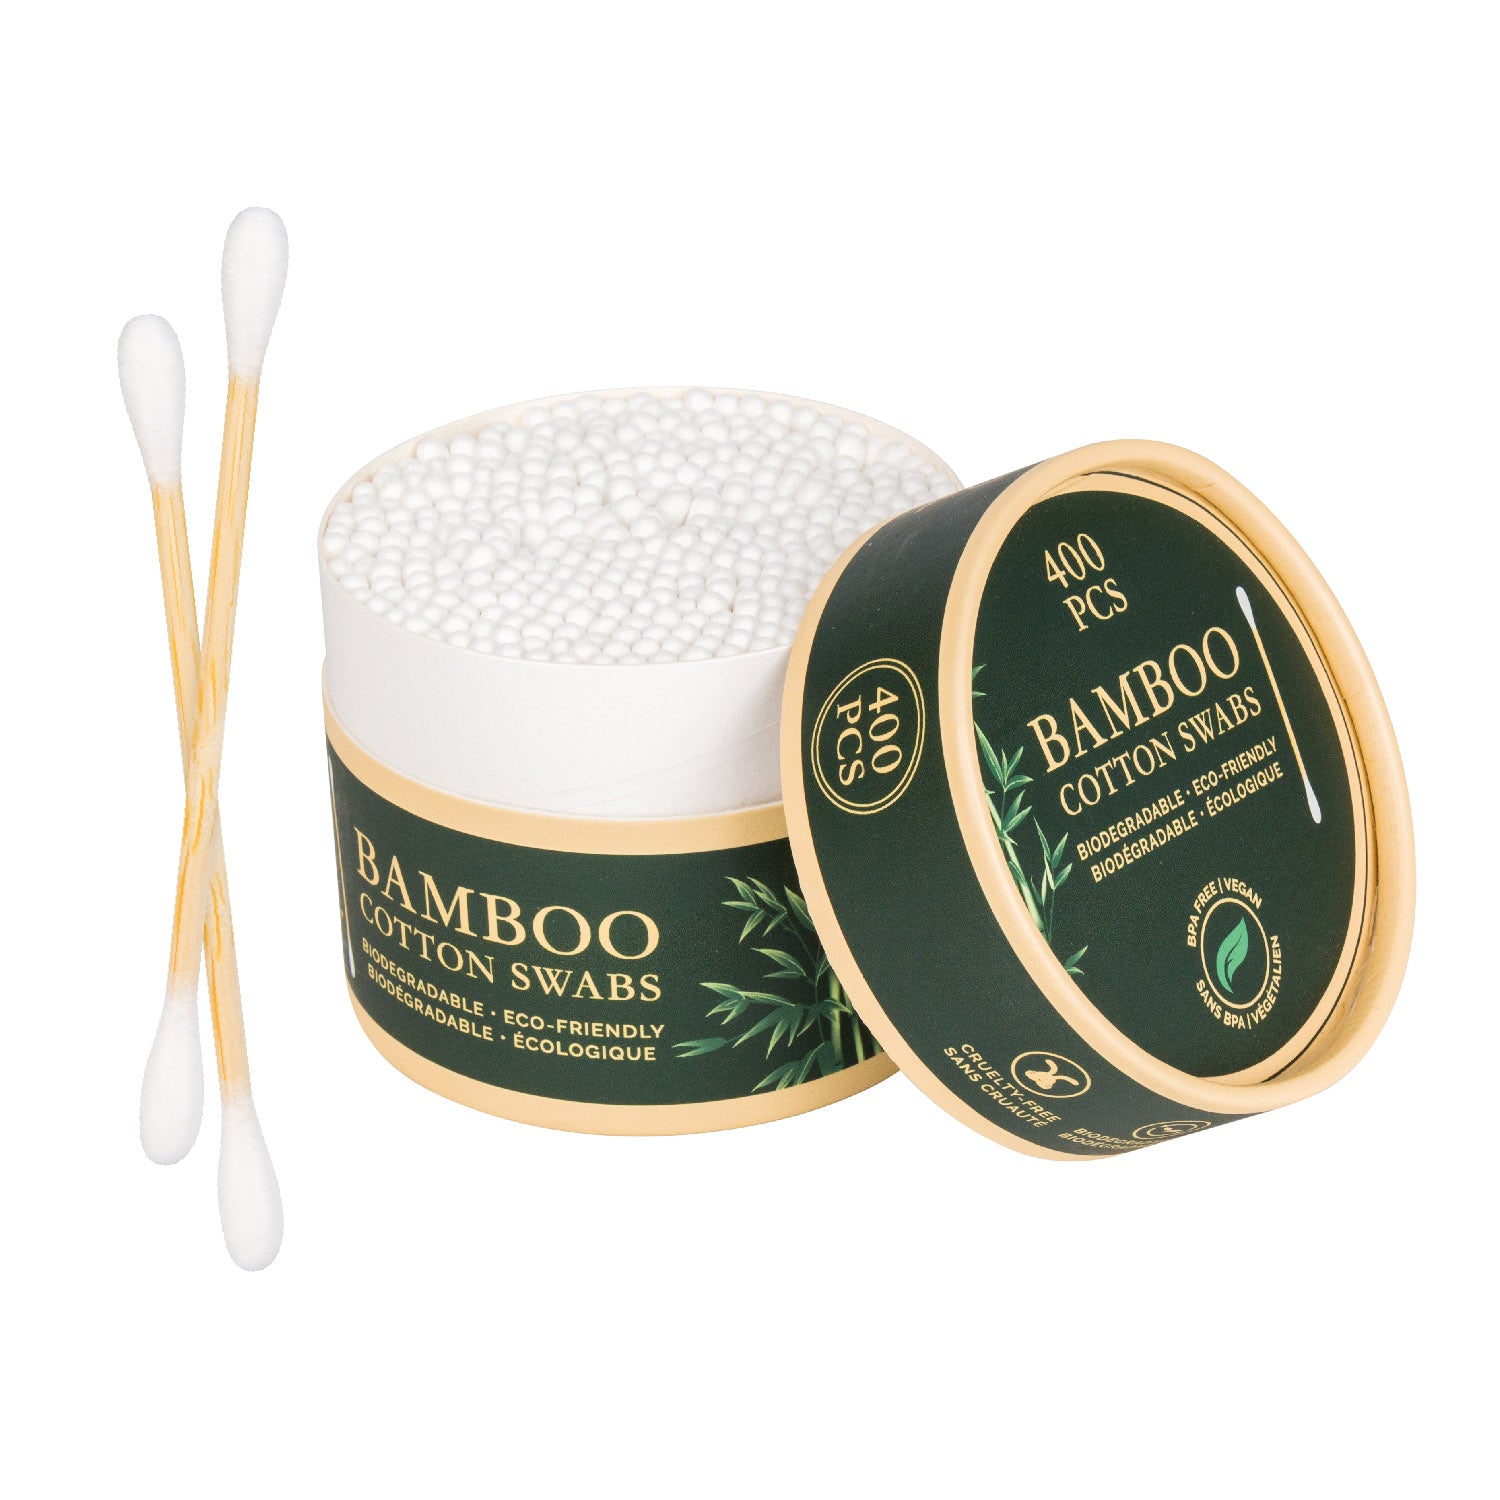 Bamboo Cotton Swabs - Mortise And Tenon